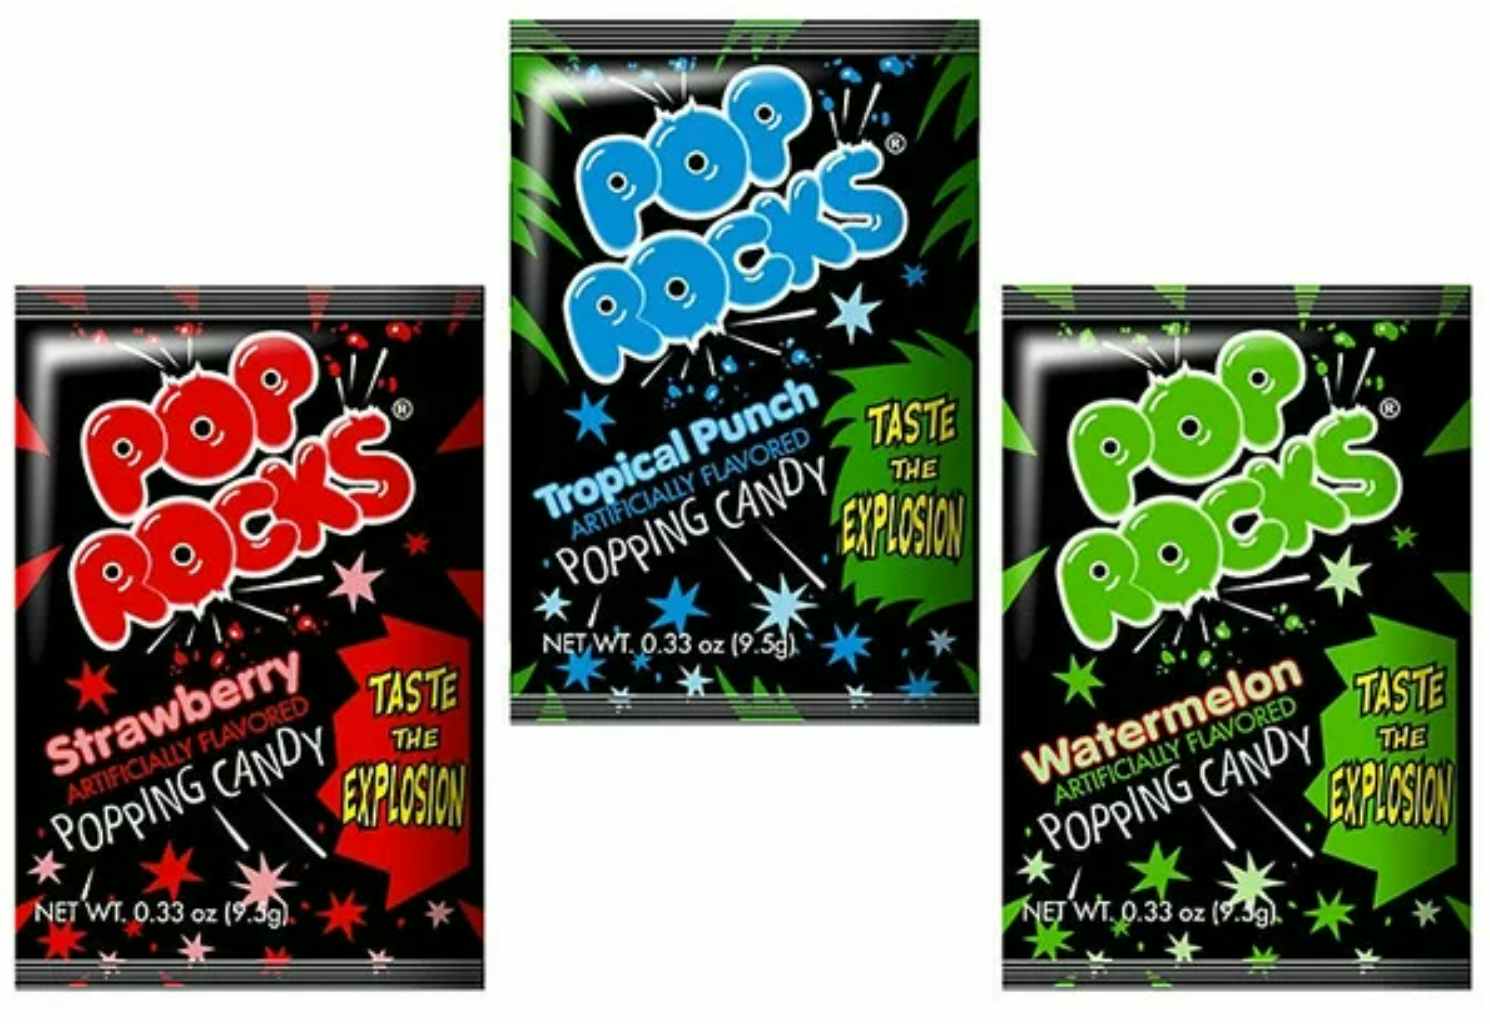 Three packages of pop rocks candy